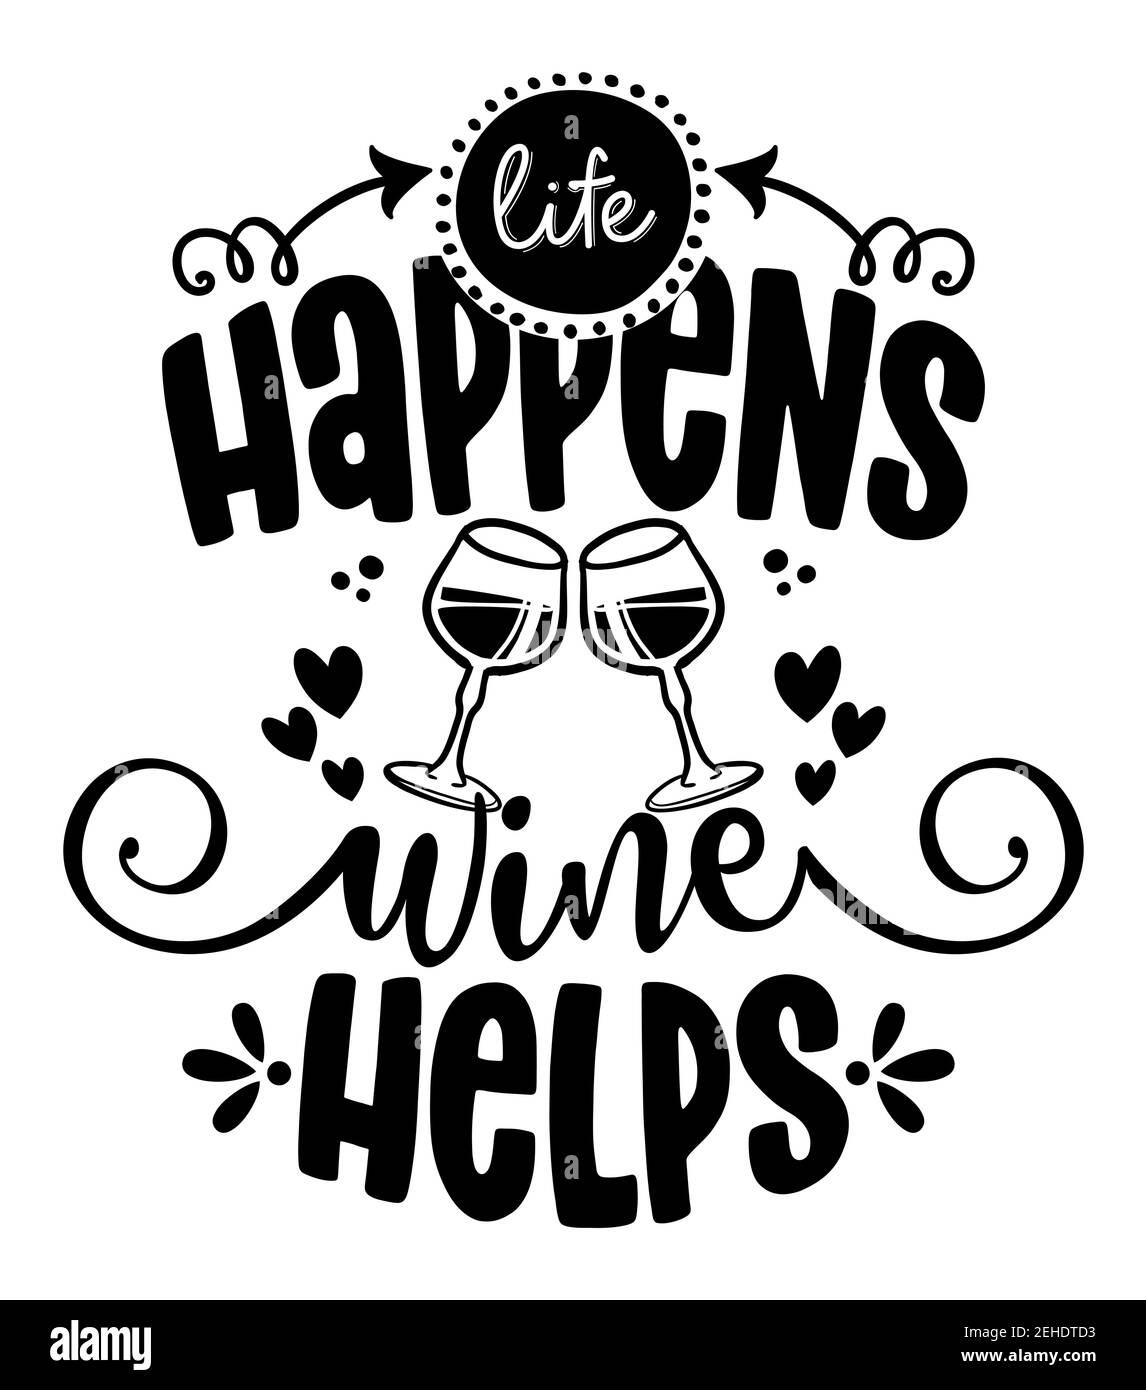 Life happens, Wine helps - design for t-shirts, cards, restaurant or pub shop wall decoration. Hand painted brush pen modern calligraphy isolated on w Stock Vector